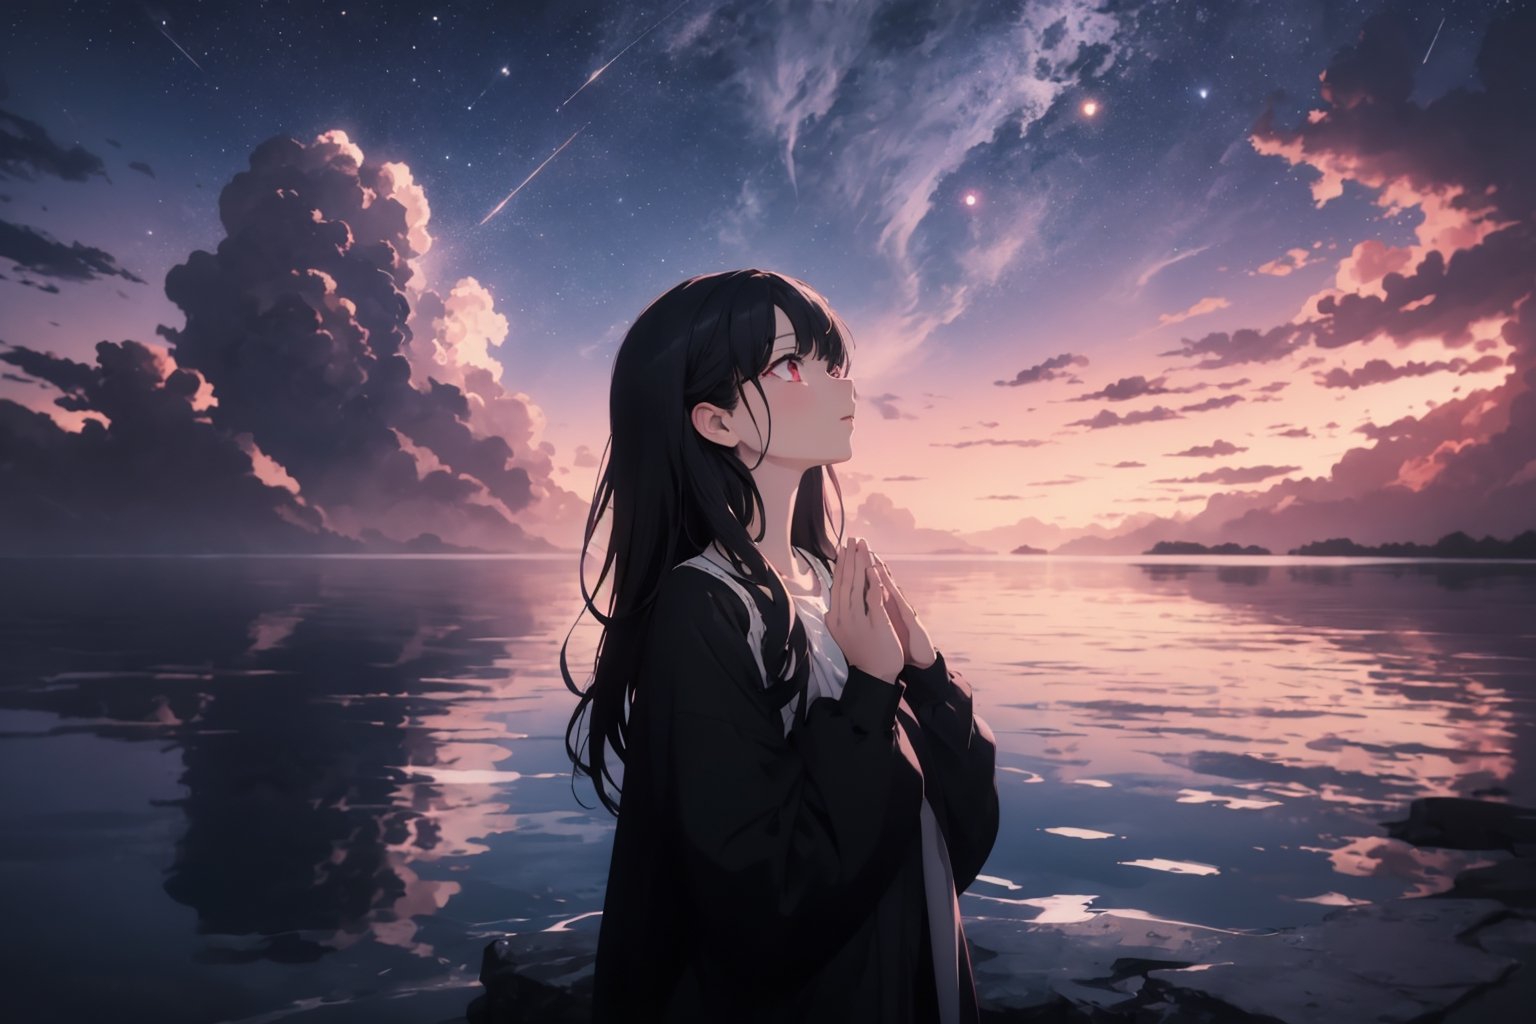 1woman(black hair, red eyes), absurdres, highres, ultra detailed, (1girl:1.3),BREAK, infrared photography, otherworldly hues, surreal landscapes, unseen light, ethereal glow, vibrant colors, ghostly effect,Marin Kitagawa,kitagawa marin sb,

more than half of the composition is empty,{{{beautiful clouds}}},dawn sea,calm sea,pink and purple,scattered stars,beautiful scene,

"An image of a girl with her own hands together in prayer, looking upwards."